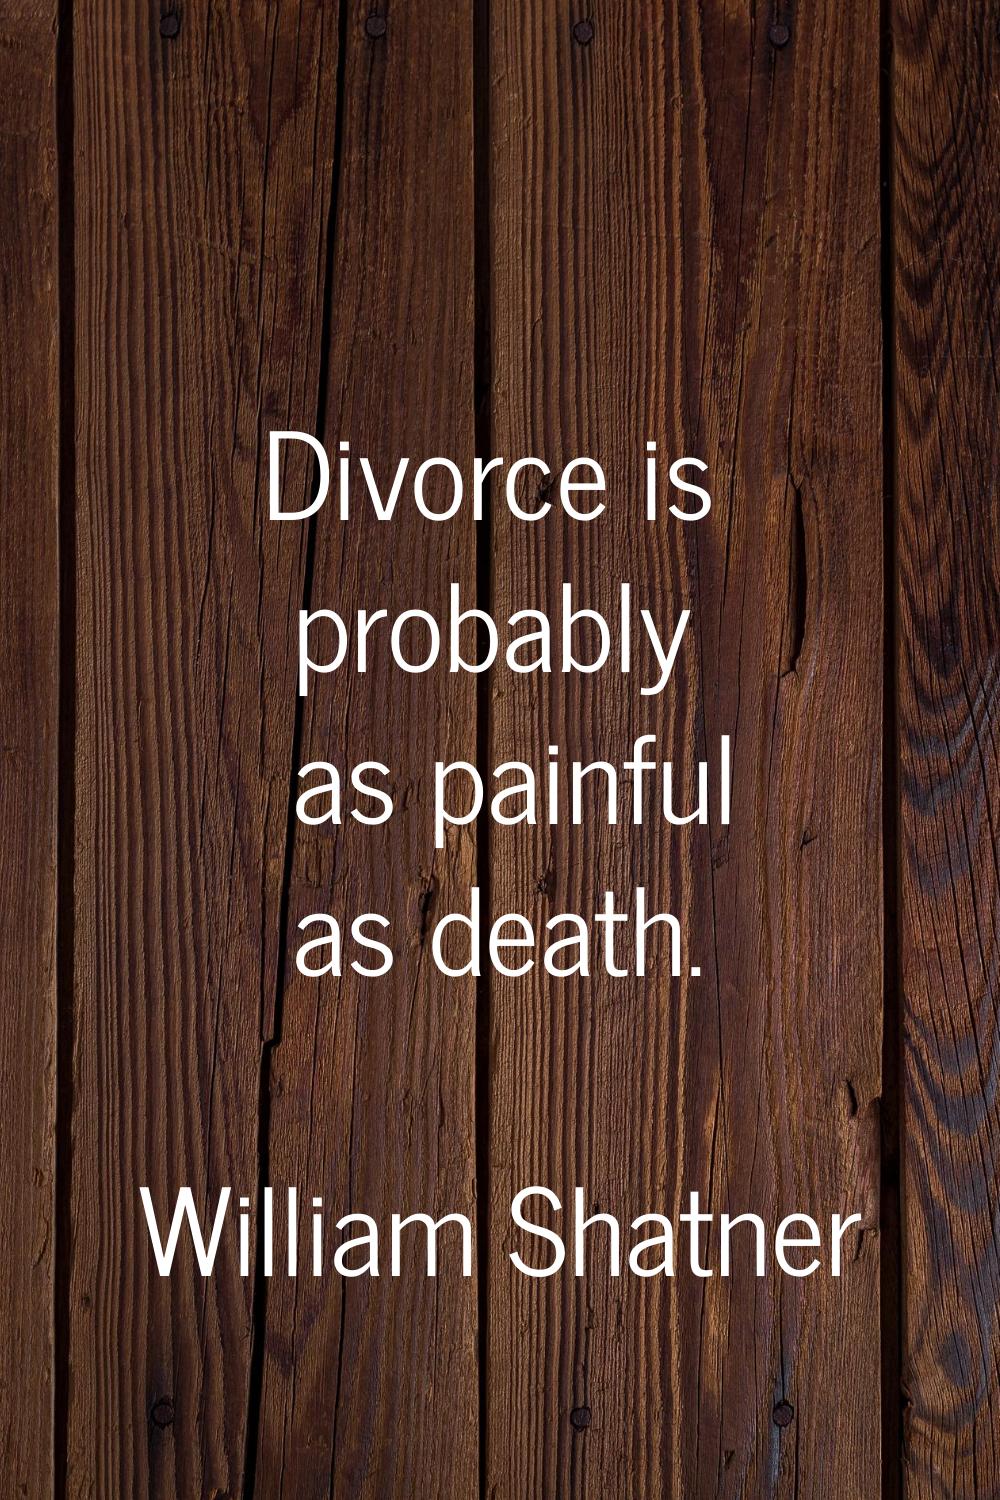 Divorce is probably as painful as death.